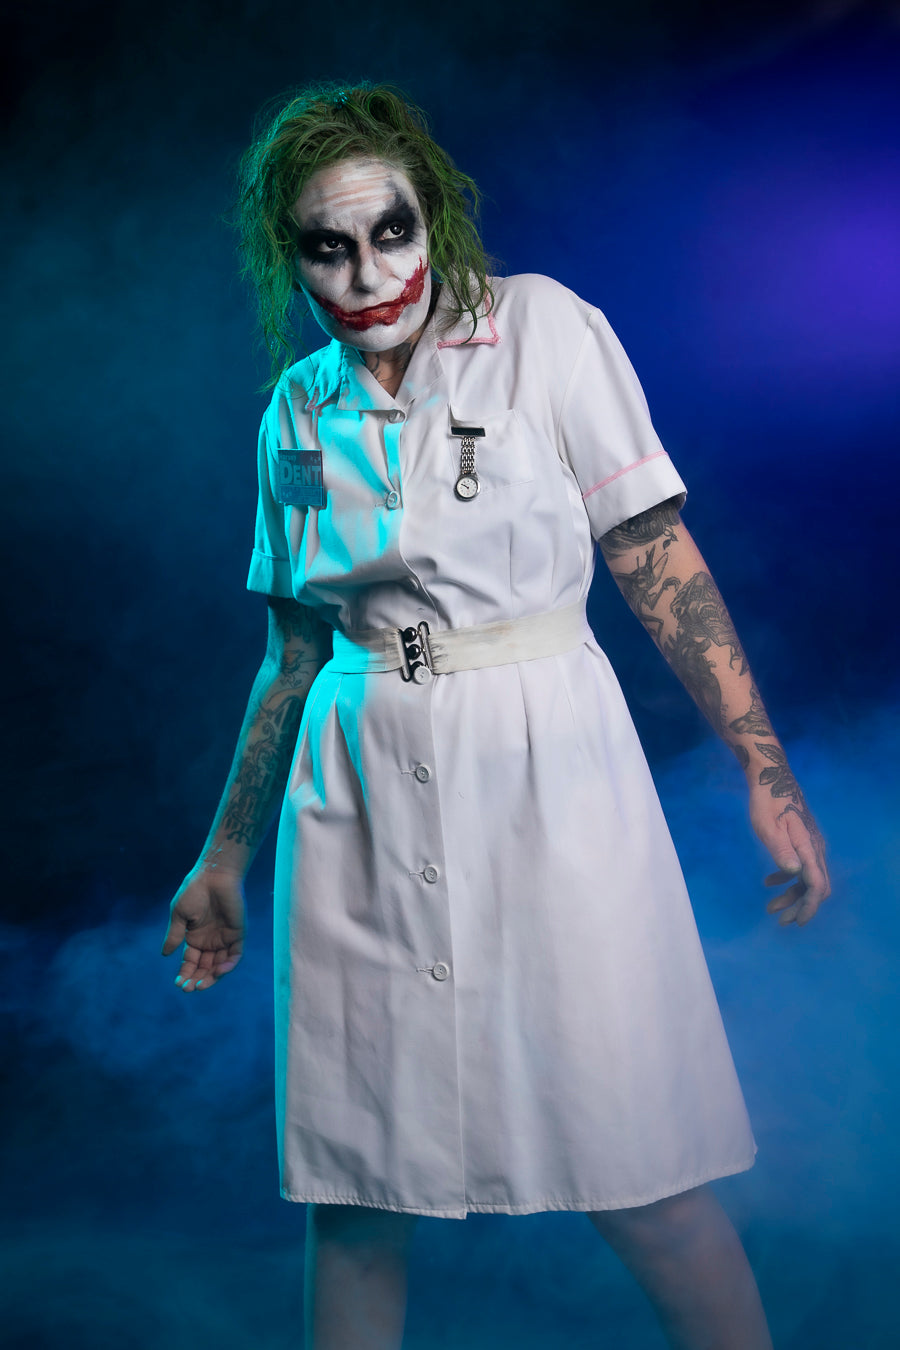 Heath Ledger Nurse Joker Costume Hire or Cosplay, plus Makeup and Photography. All by and available at Little Shop of Horrors Costumery Mornington